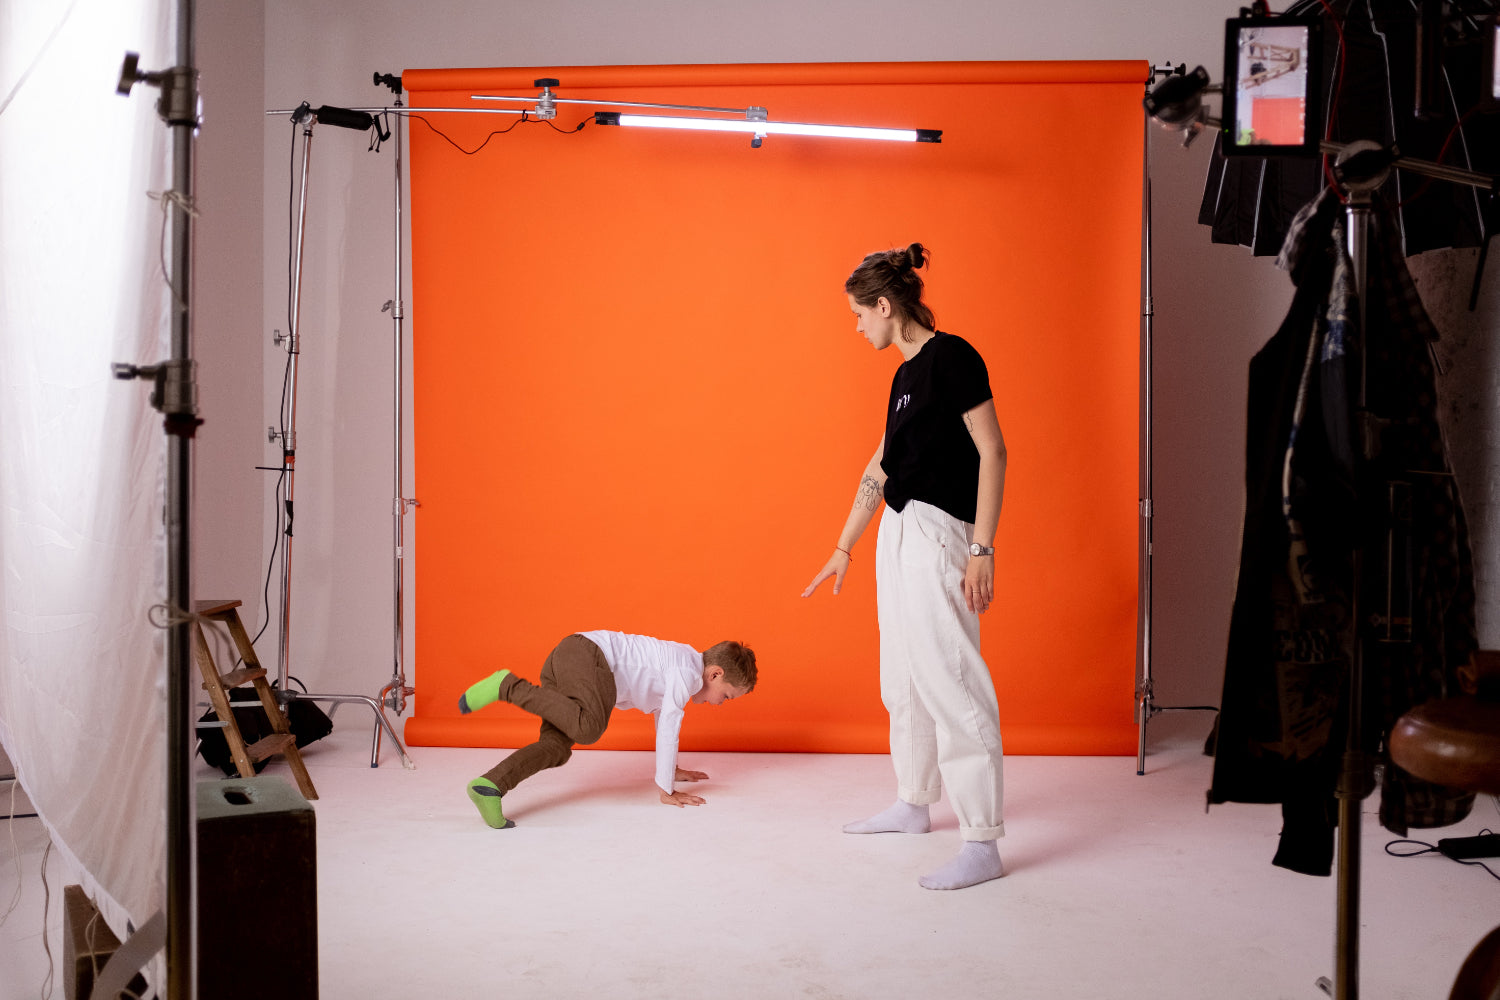 An adult and a child perform for the camera against an orange backdrop